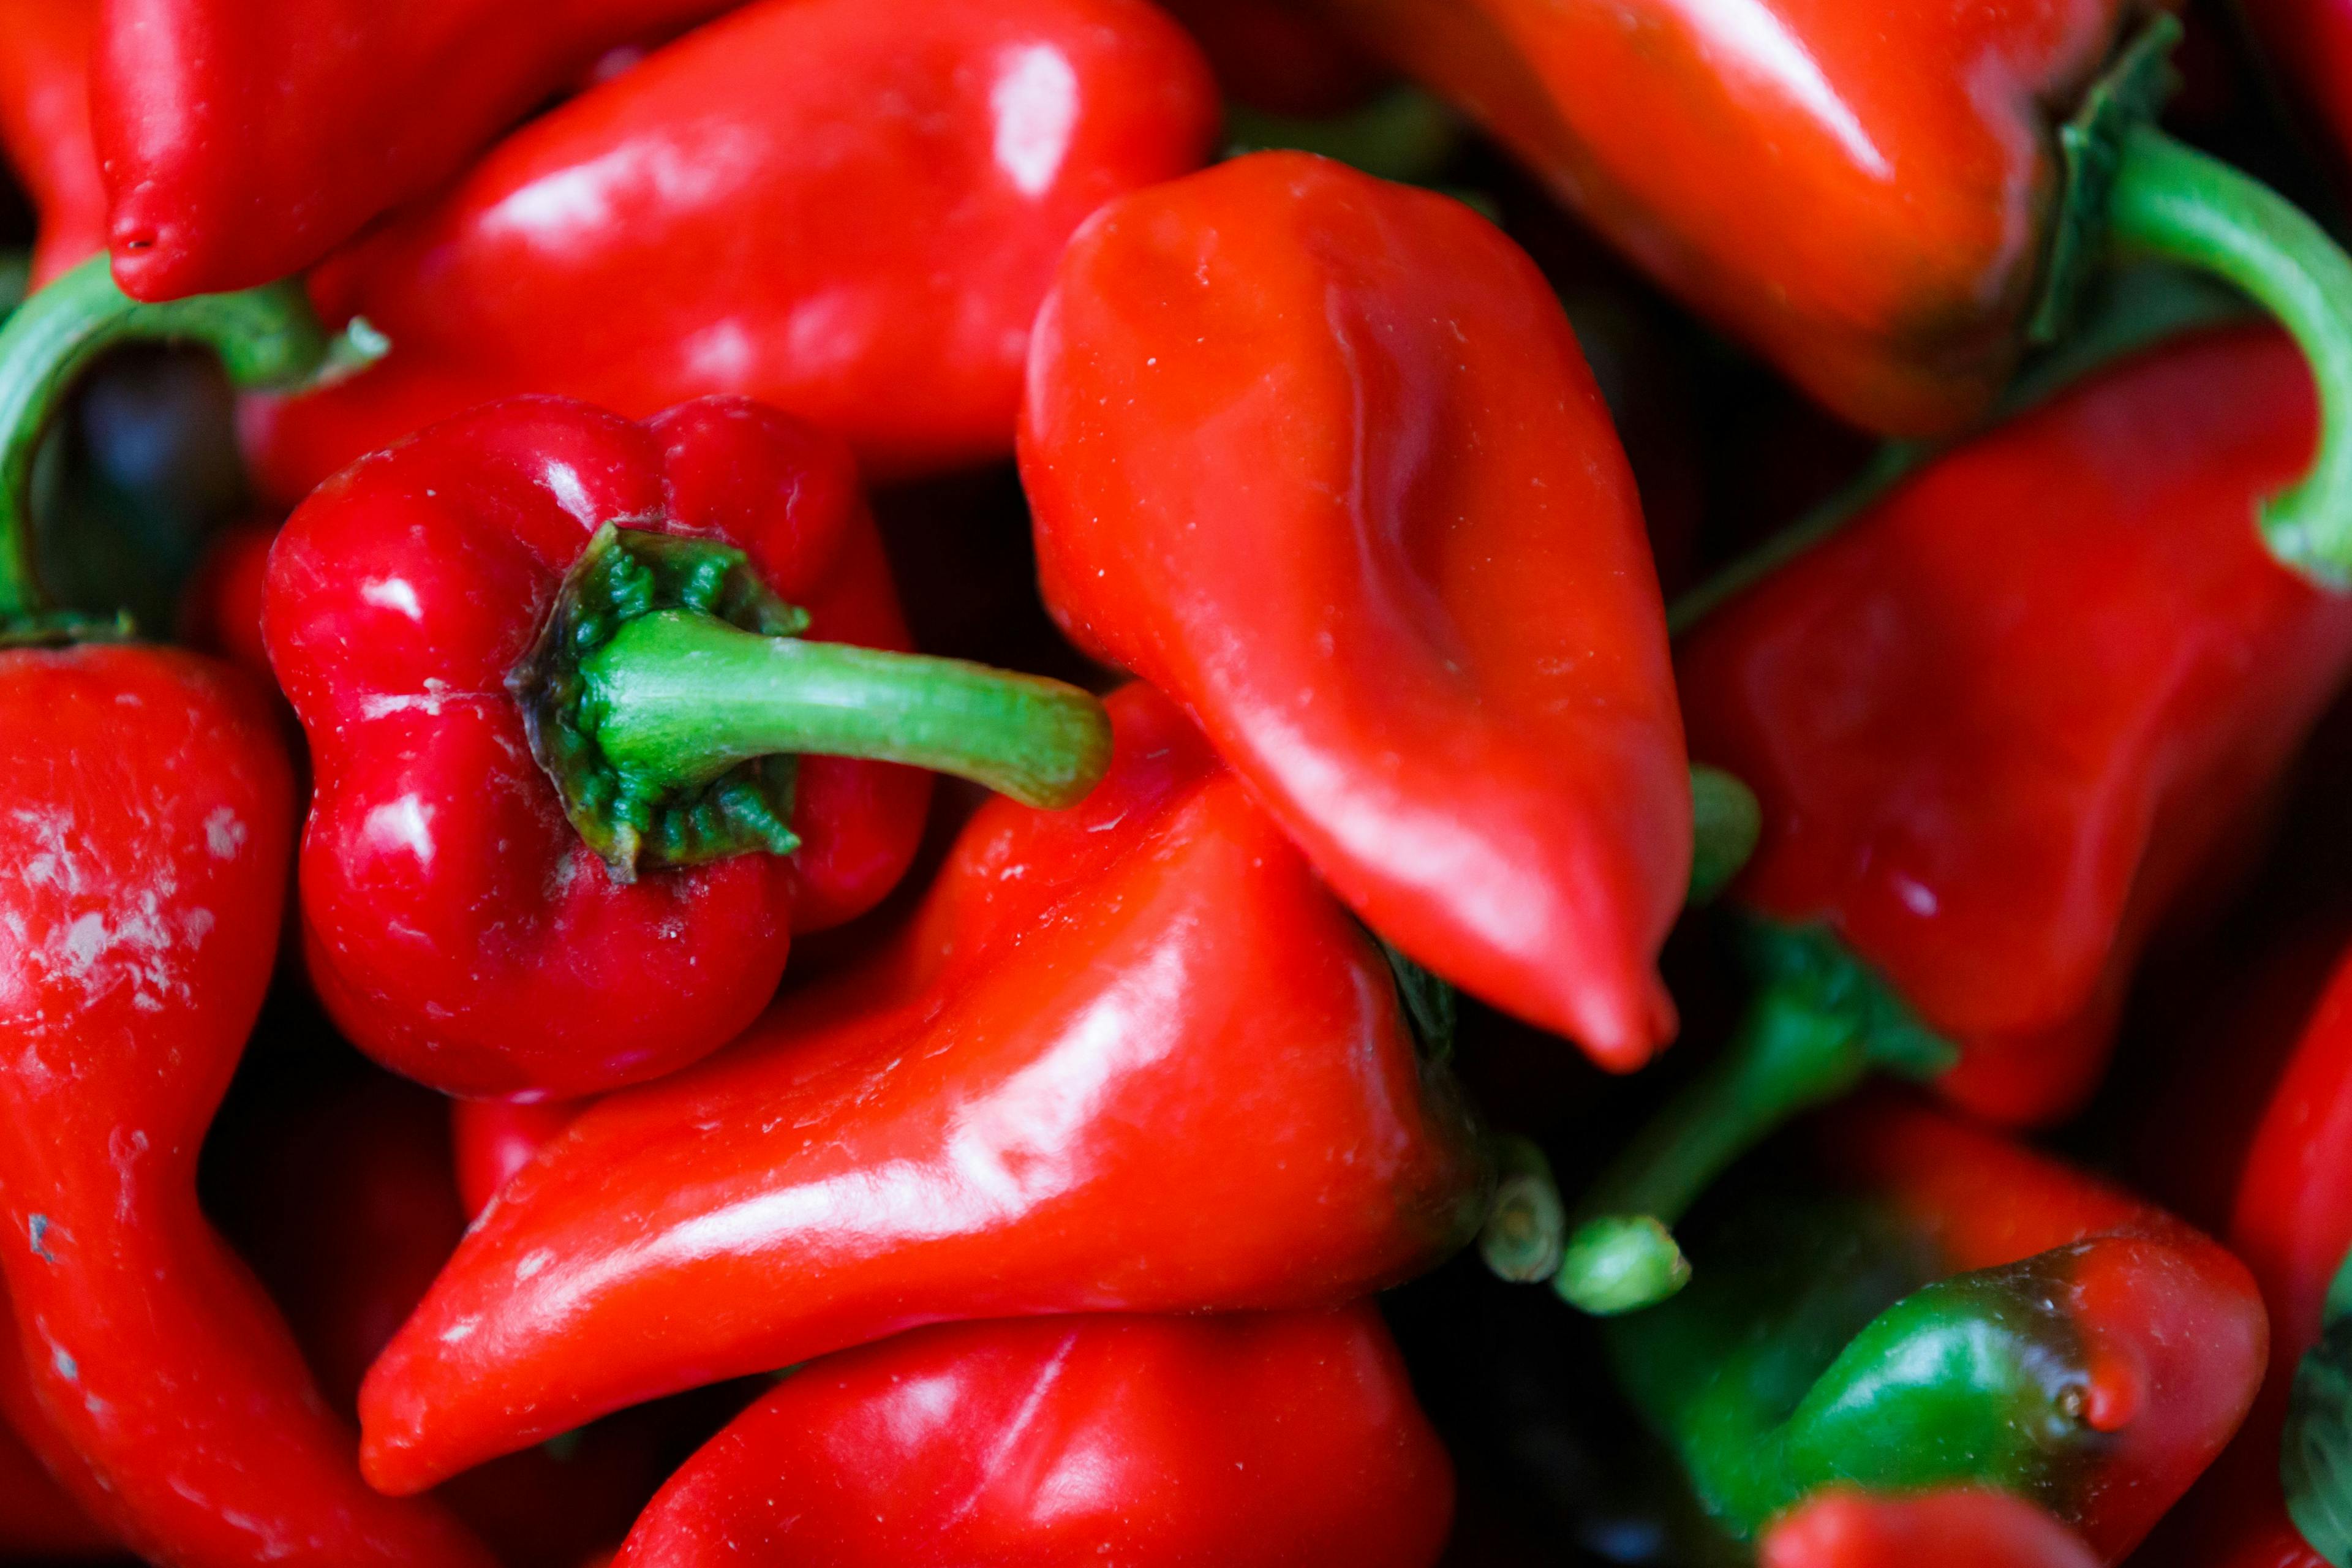 Background of piquillo peppers, in Lodosa, spain | Image Credit: © bonilla1879 - stock.adobe.com